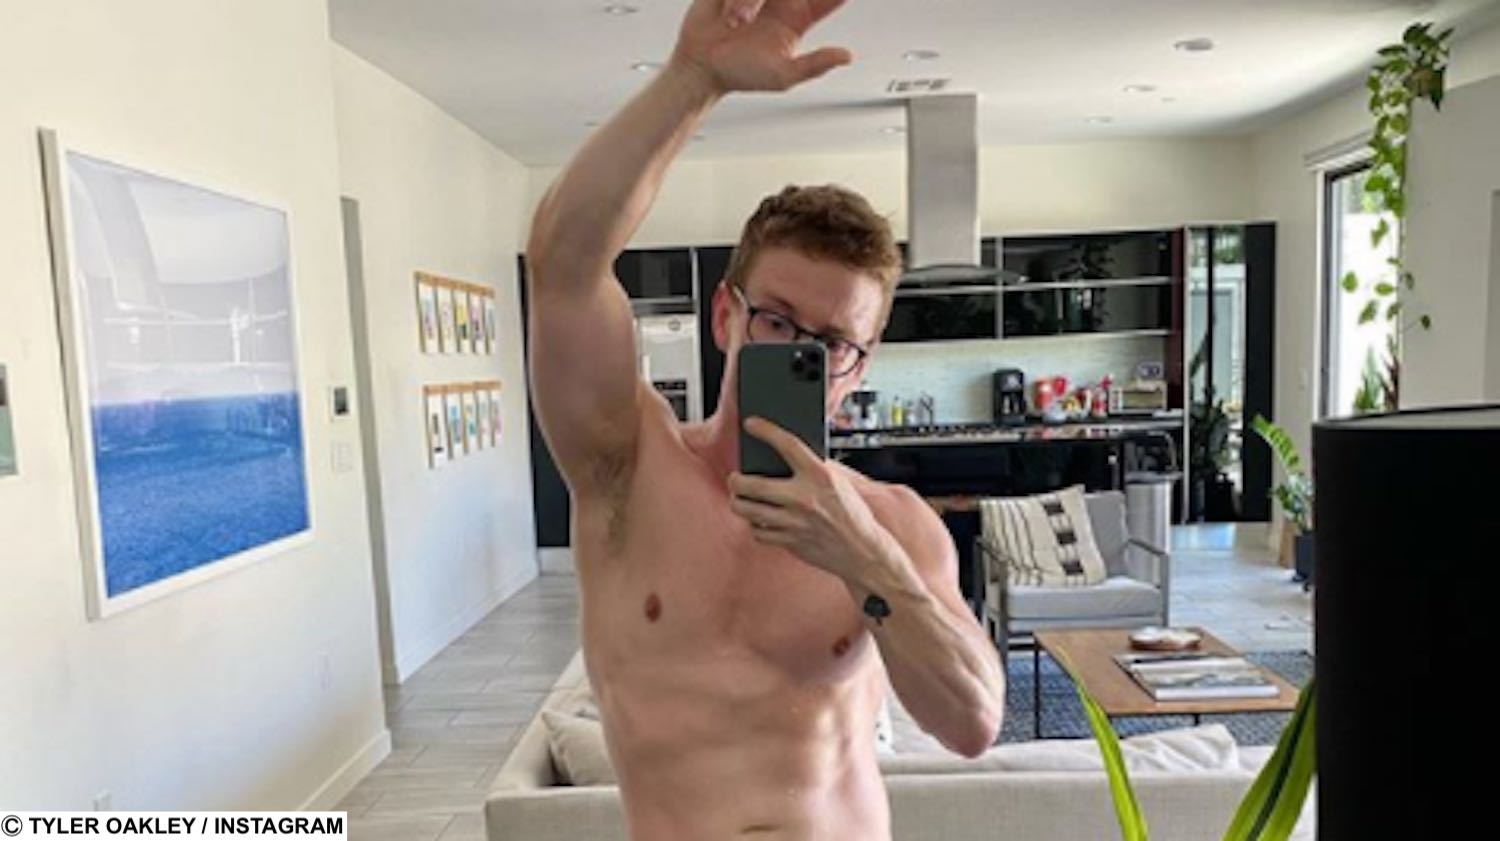 Tyler Oakley sends fans into a meltdown as he shares a revealing picture and that he works out stoned